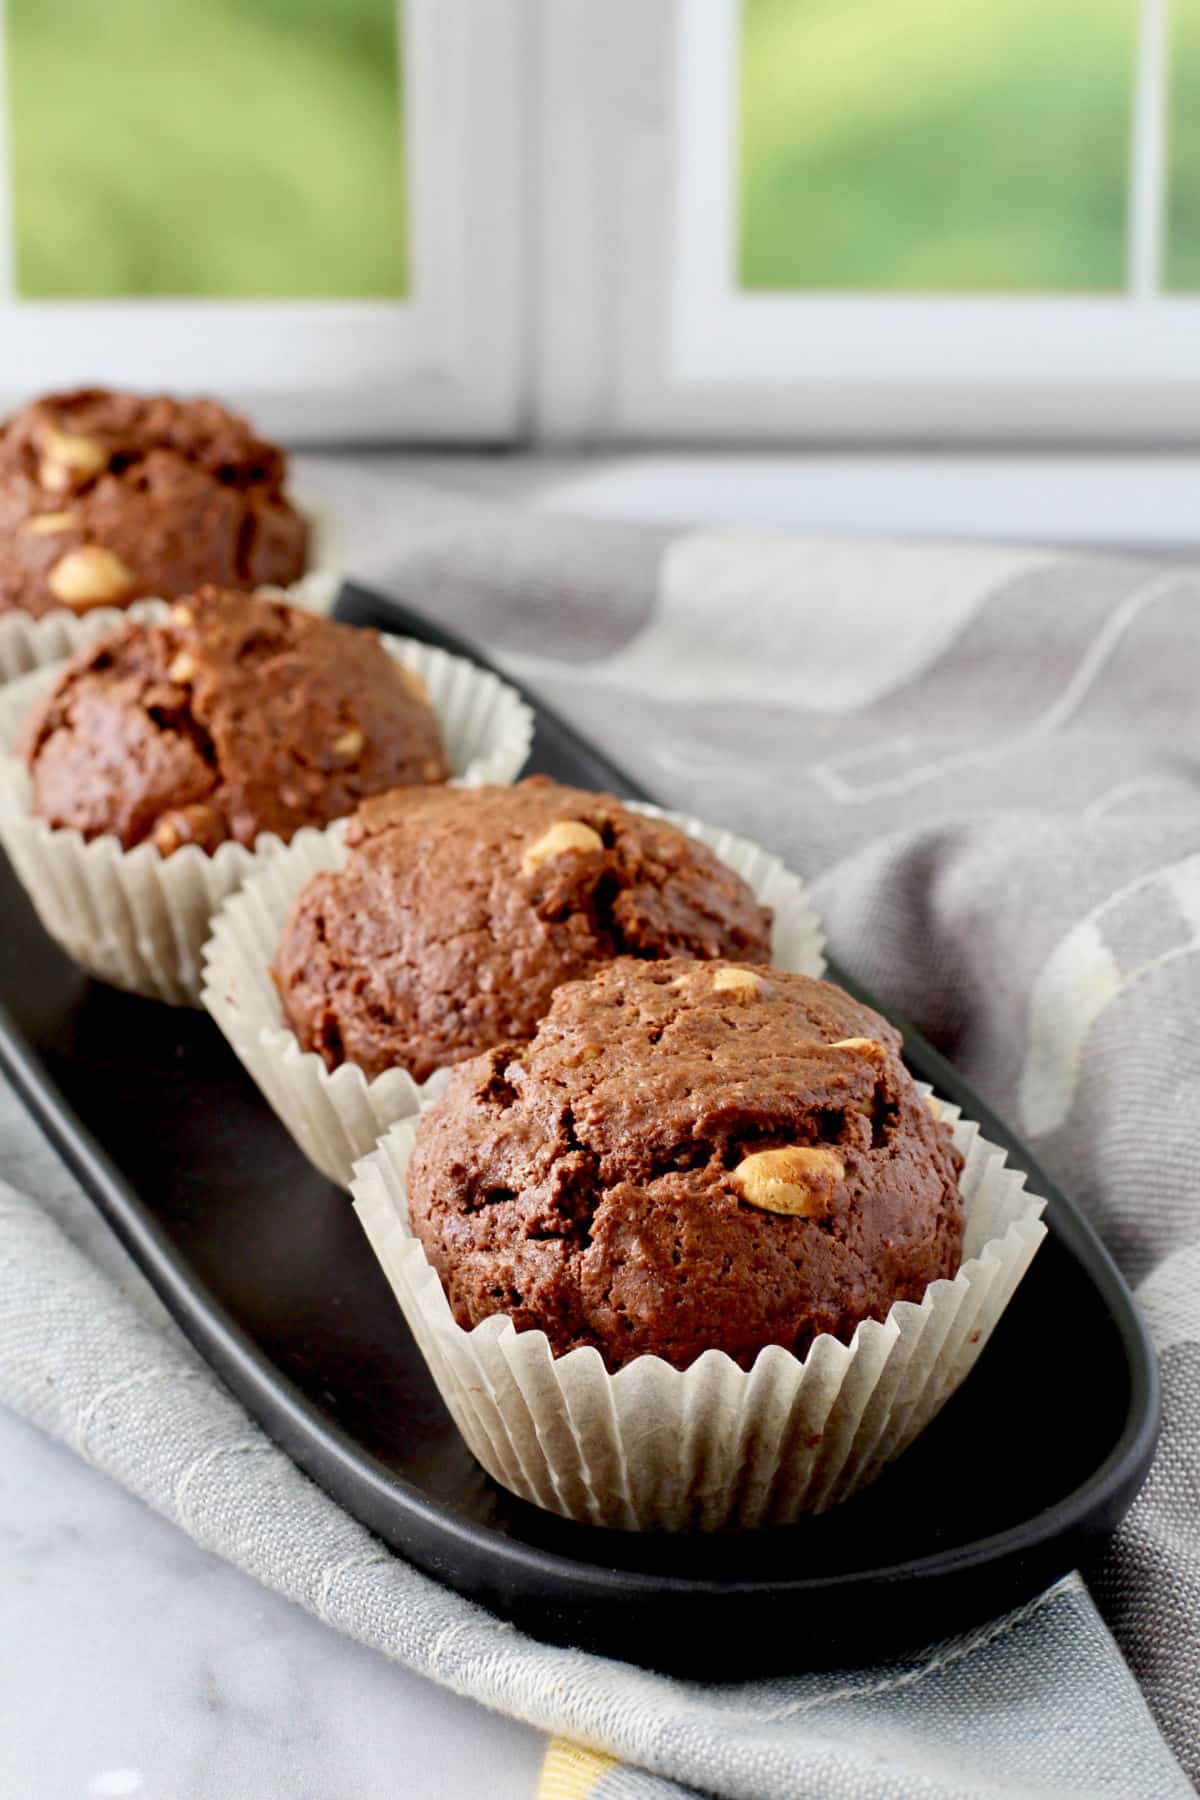 Chocolate Peanut Butter Chip Muffins on a long black plate.